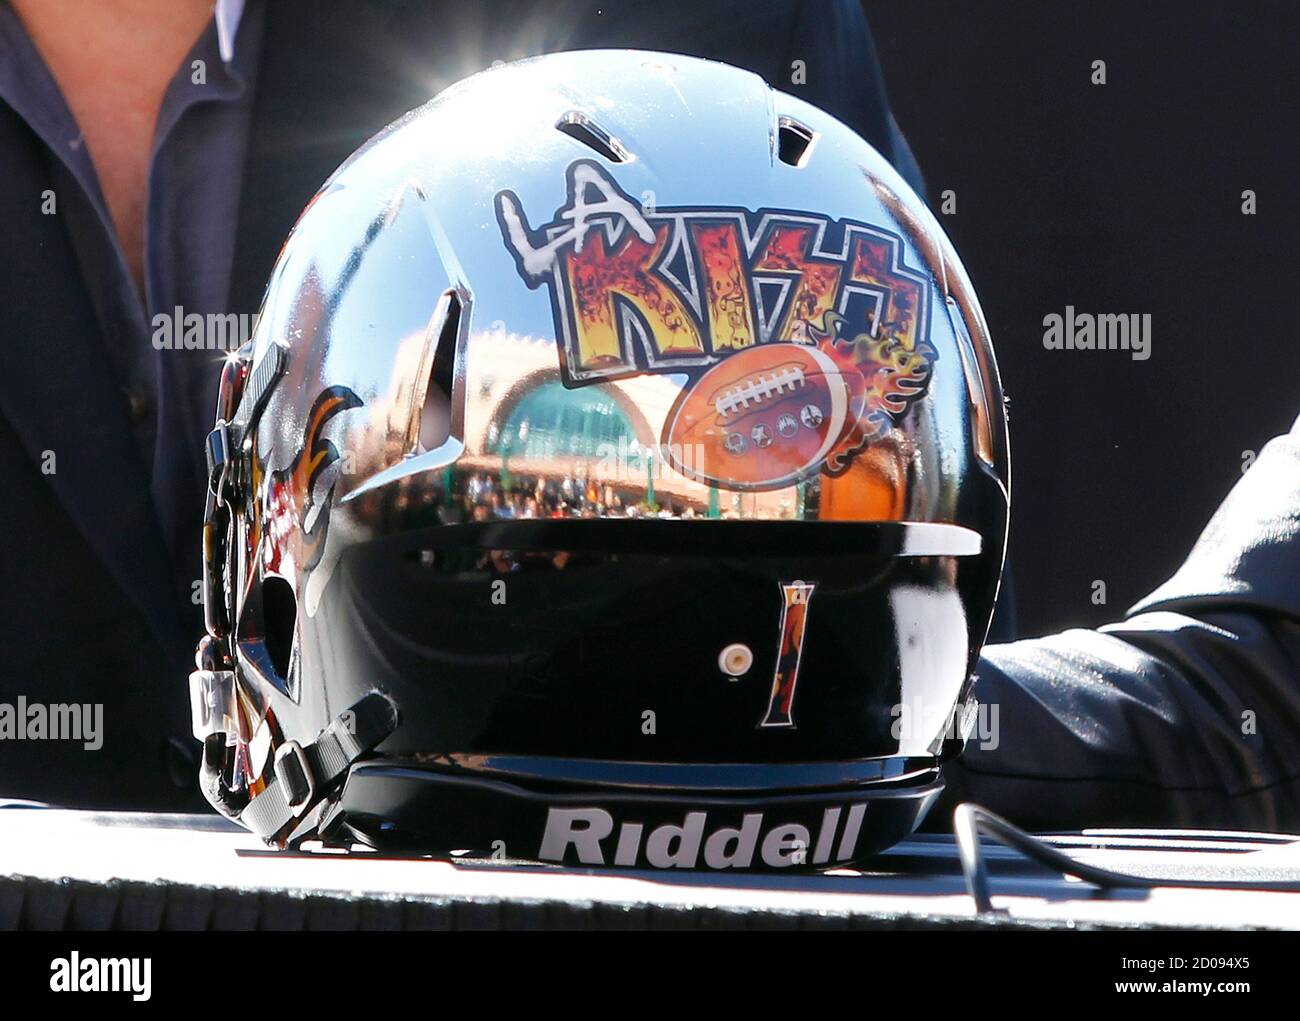 The back of a new helmet is seen at a news conference announcing rock band Kiss' part-ownership of an Arena Football League team, the Los Angeles Kiss, in Anaheim, California March 10, 2014. The LA Kiss will play their home games in Anaheim and the season kick-off will include a concert by Kiss. REUTERS/Alex Gallardo (UNITED STATES - Tags: SPORT ENTERTAINMENT) Stock Photo